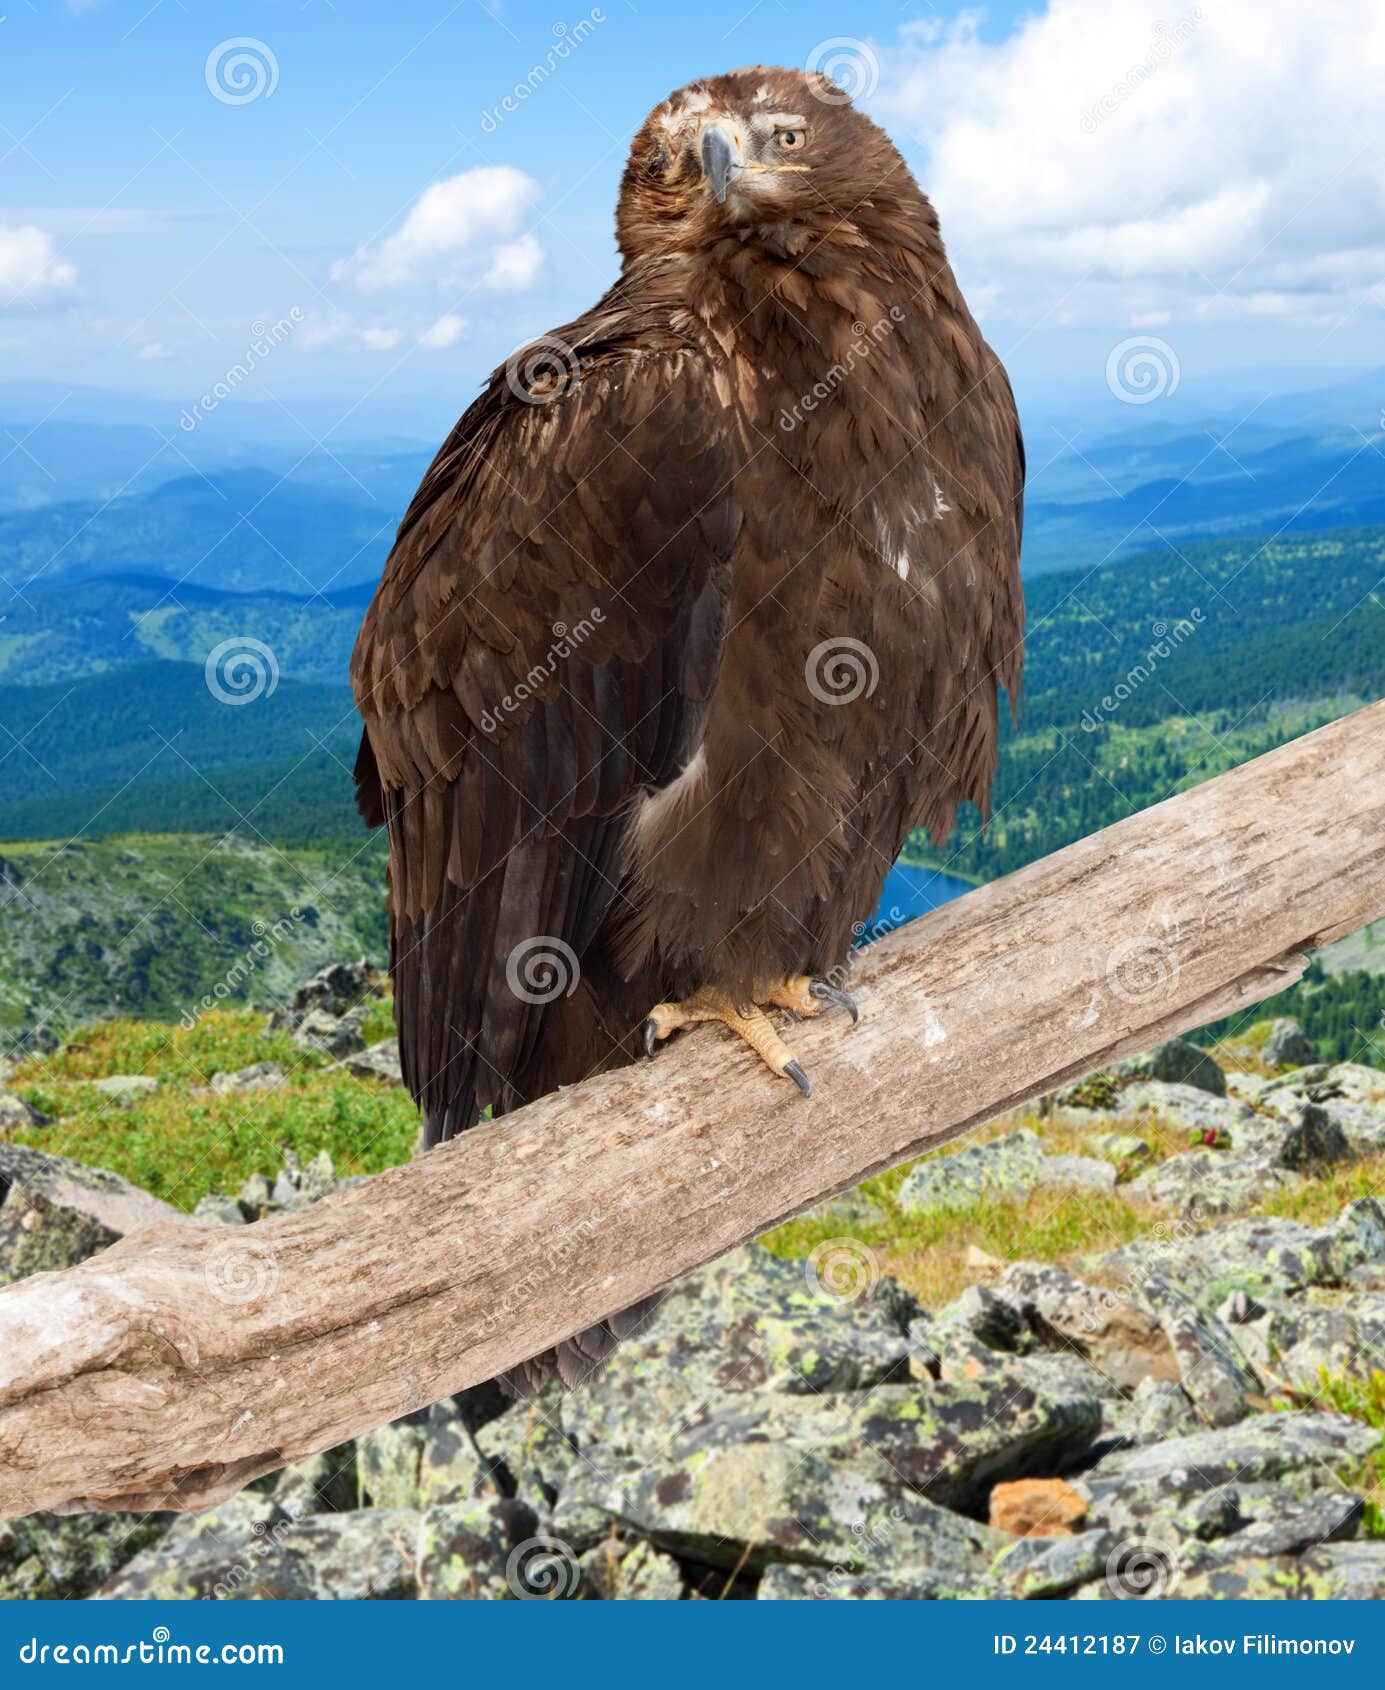 eagle against wildness background